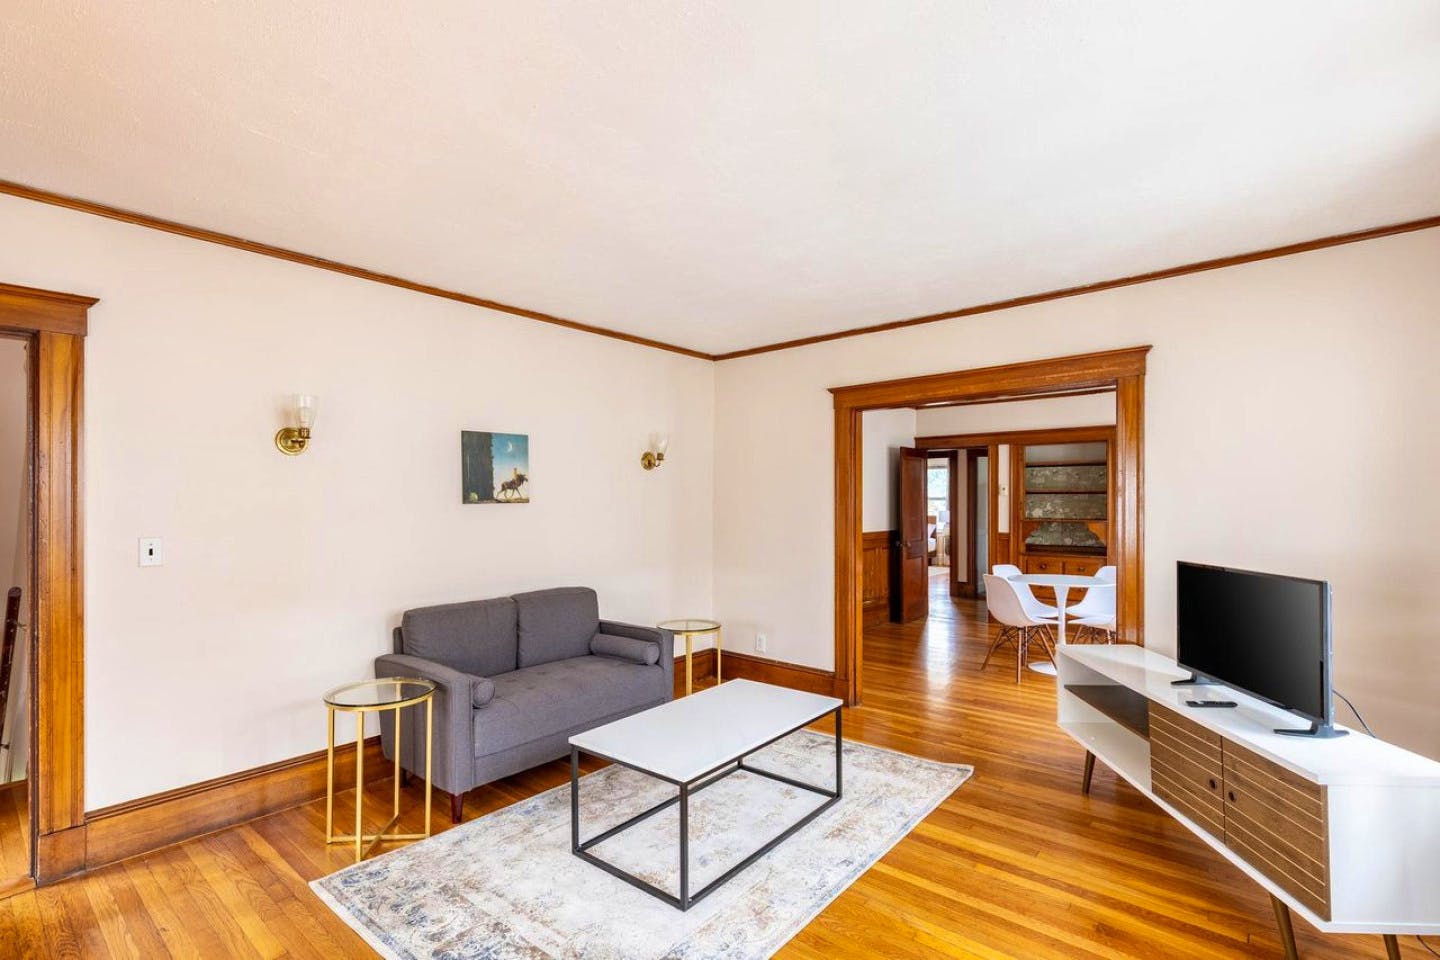 Magnificient Cozy Apt. 1 mile away from Hobart Park